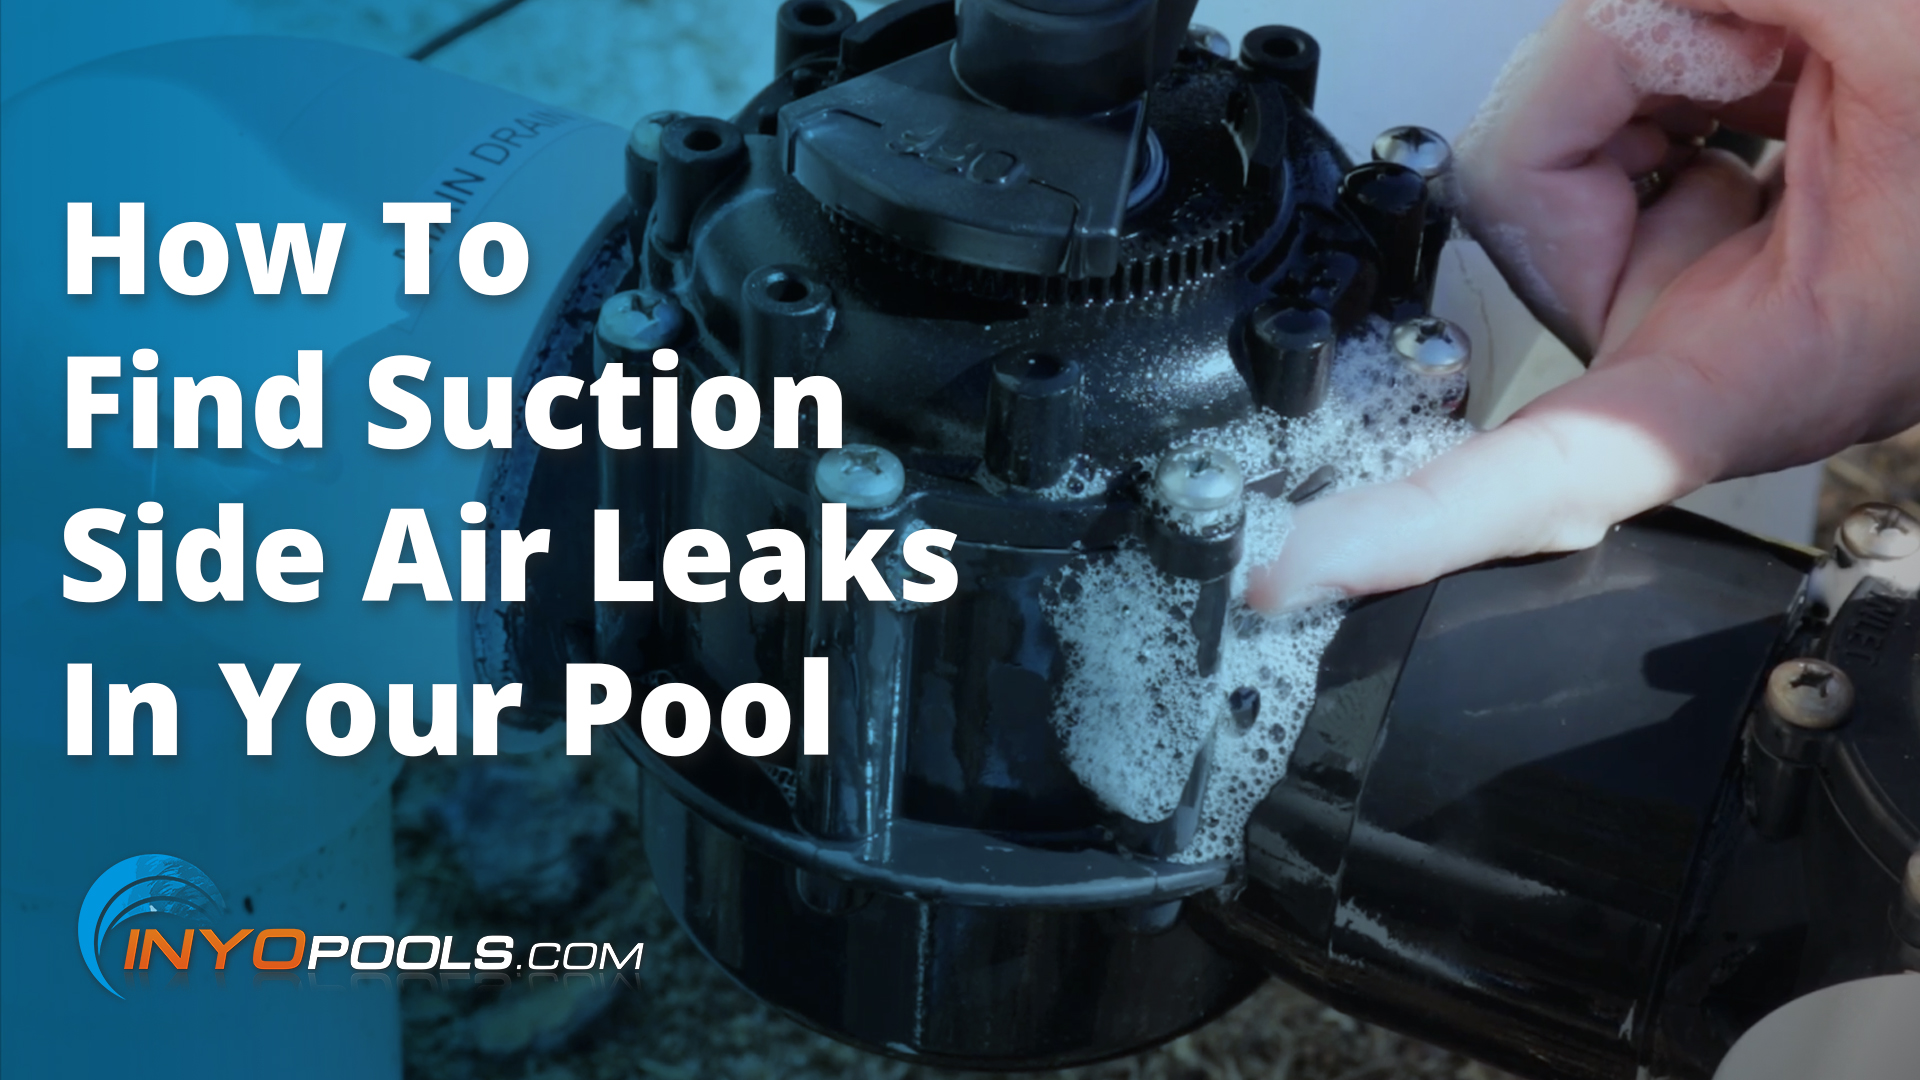 How to test for suction side air leaks